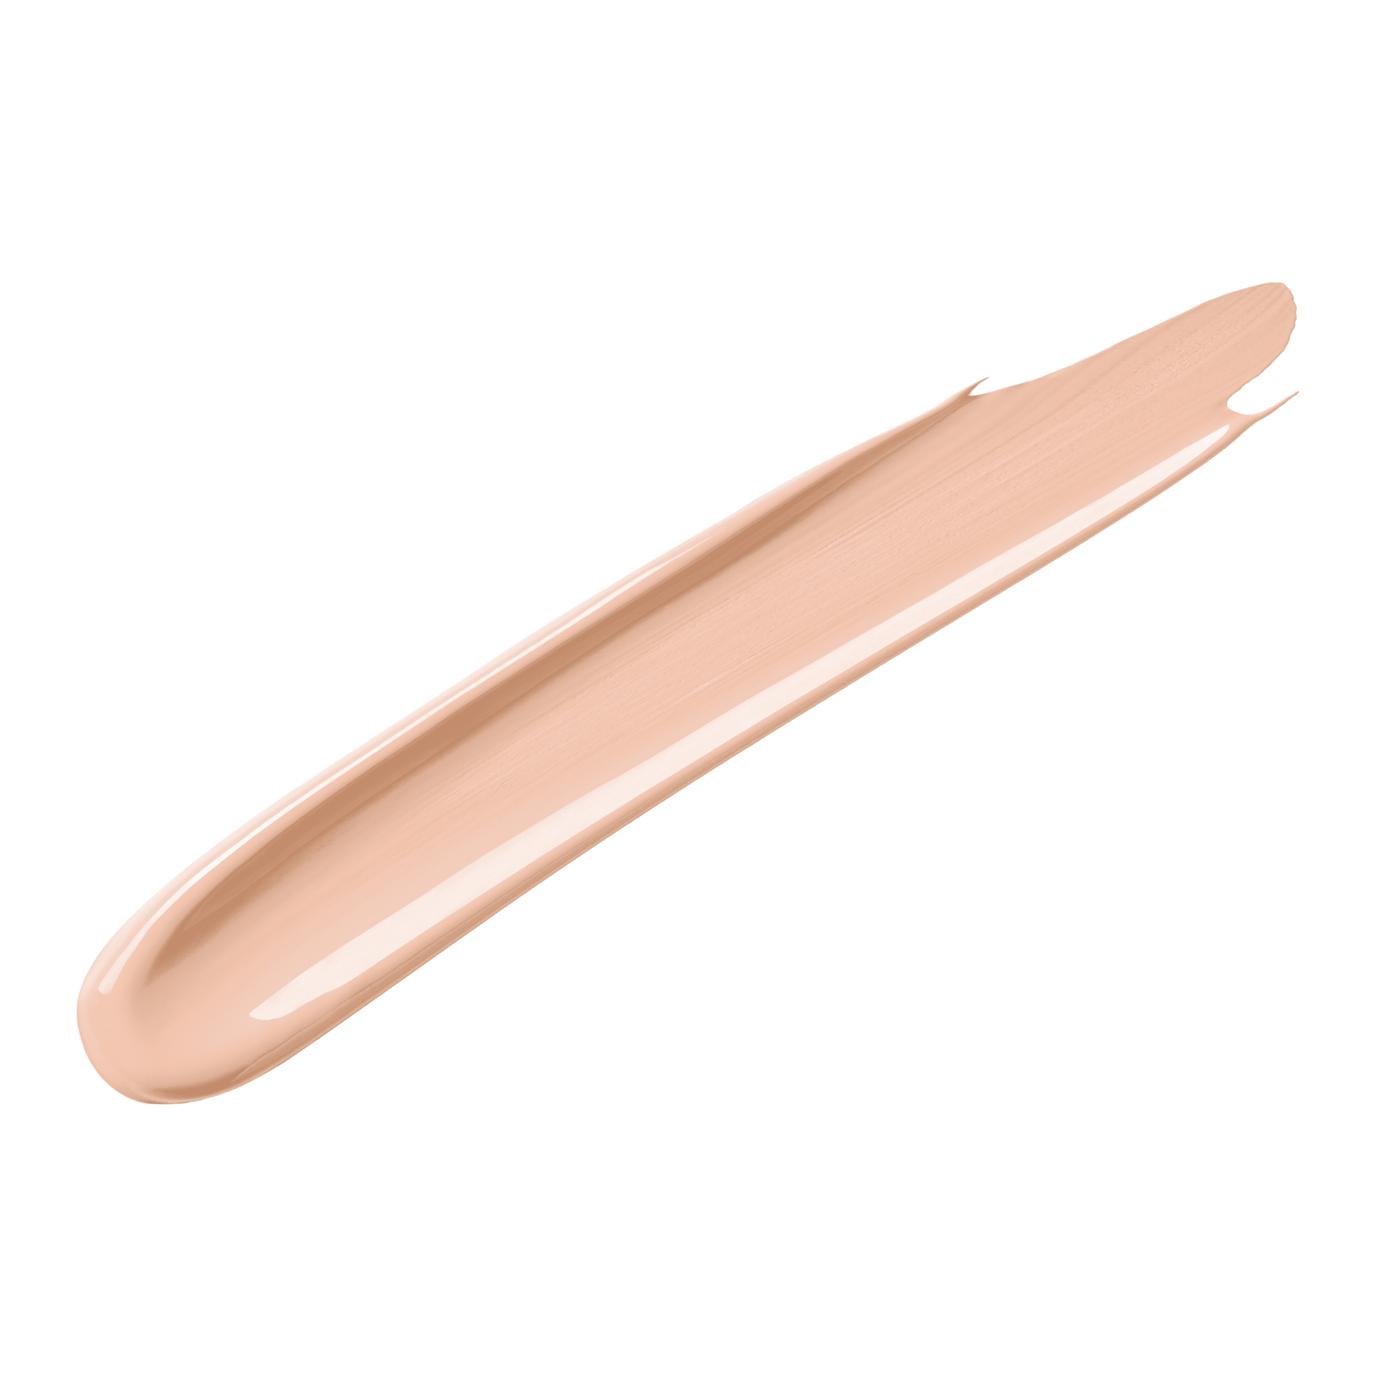 Covergirl Clean Invisible Concealer - Light Ivory; image 8 of 15